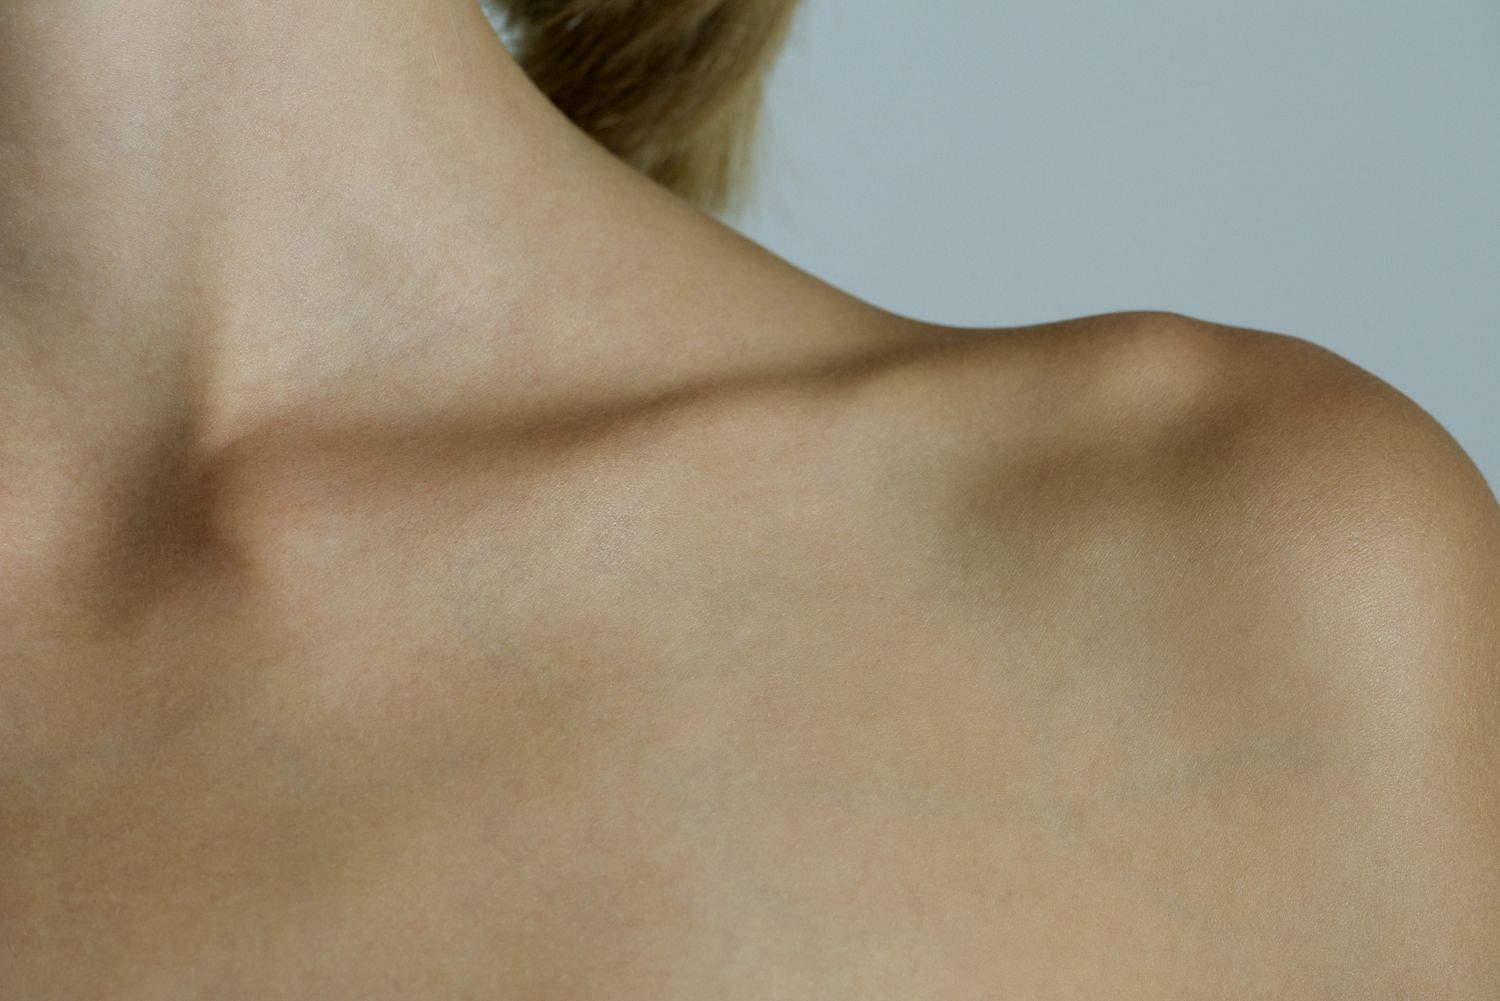 Collarbone workout (Image via Getty Images)